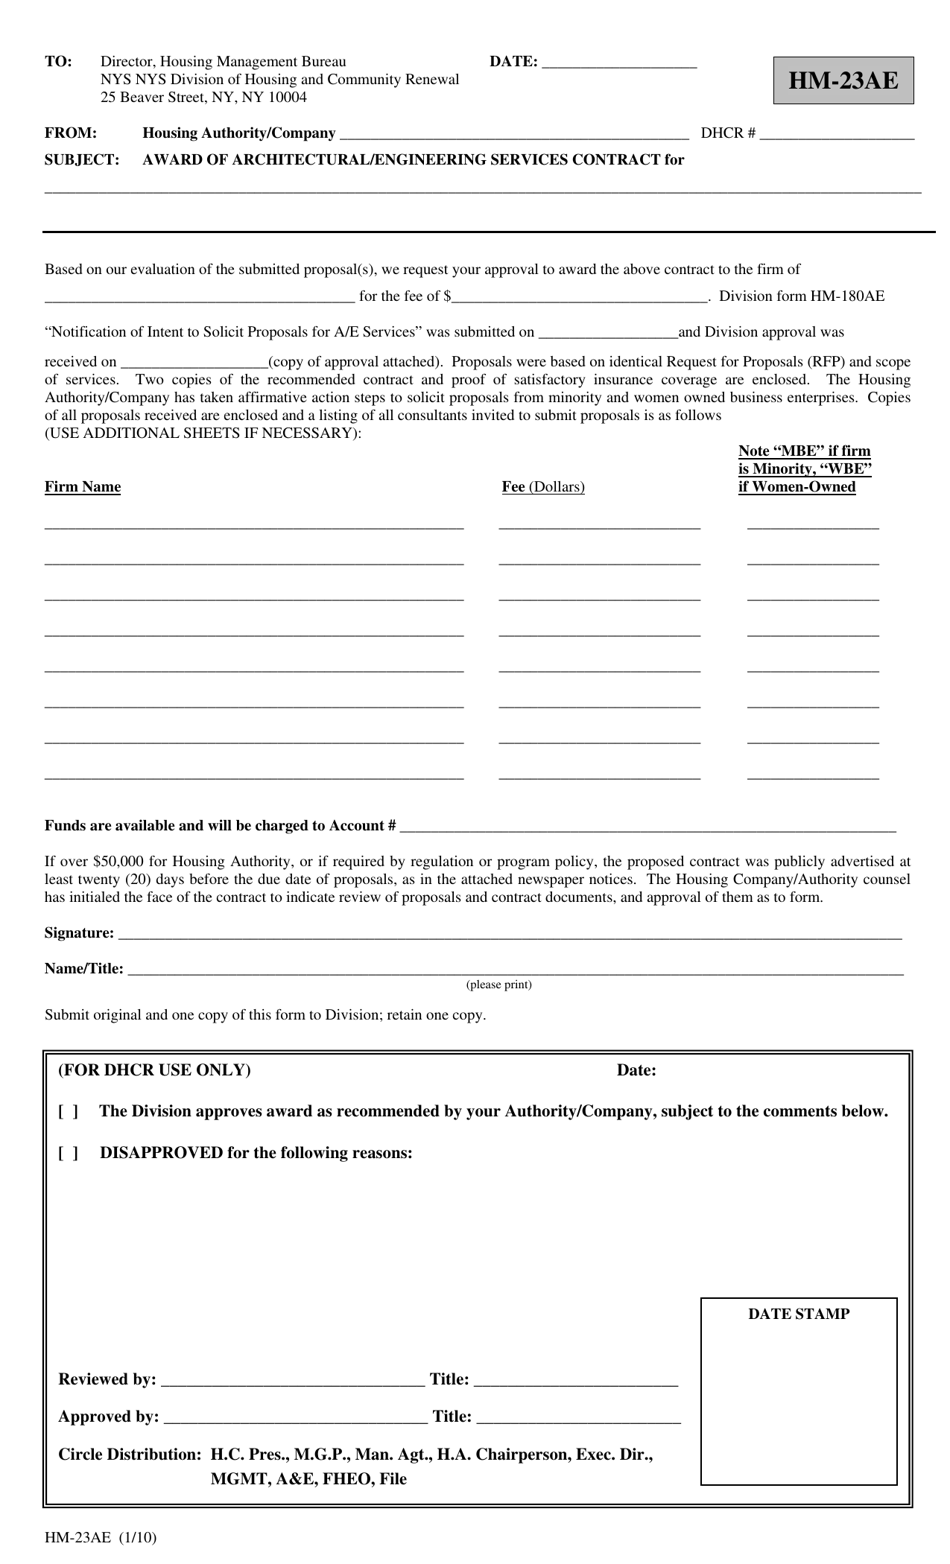 Form HM-23AE Award of Architectural / Engineering Services Contract - New York, Page 1